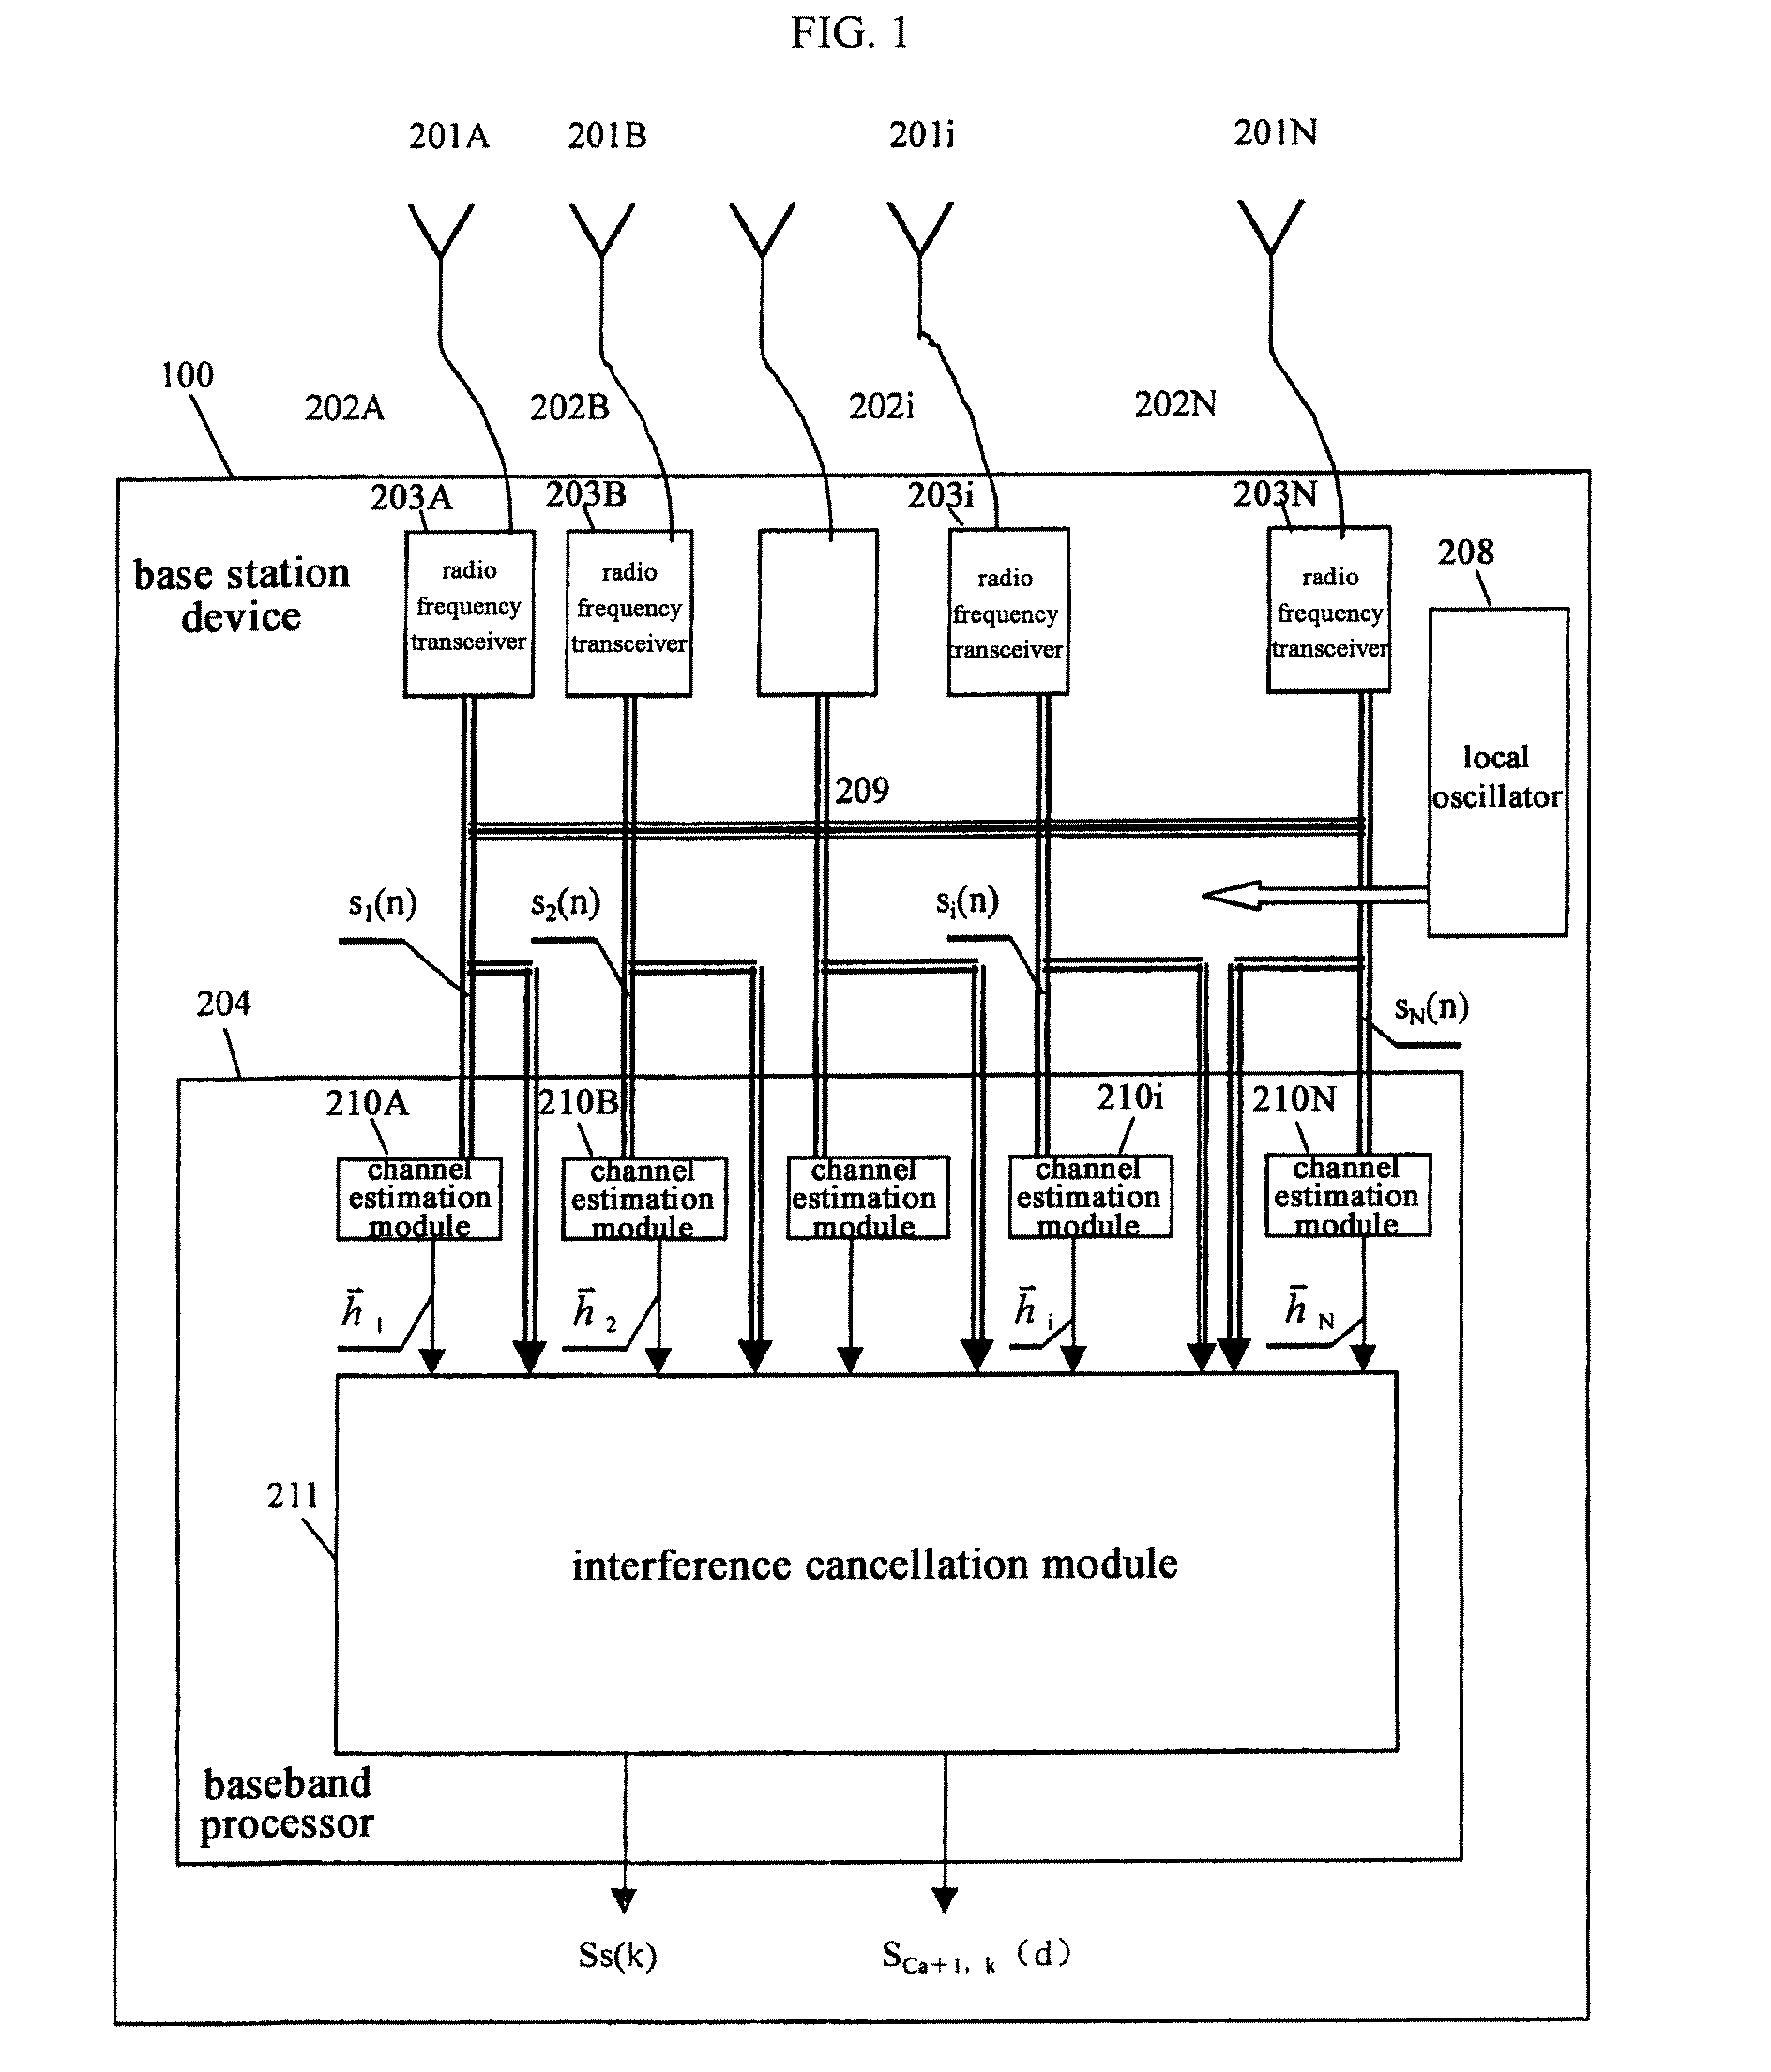 Baseband processing method based on smart antenna and interference cancellation